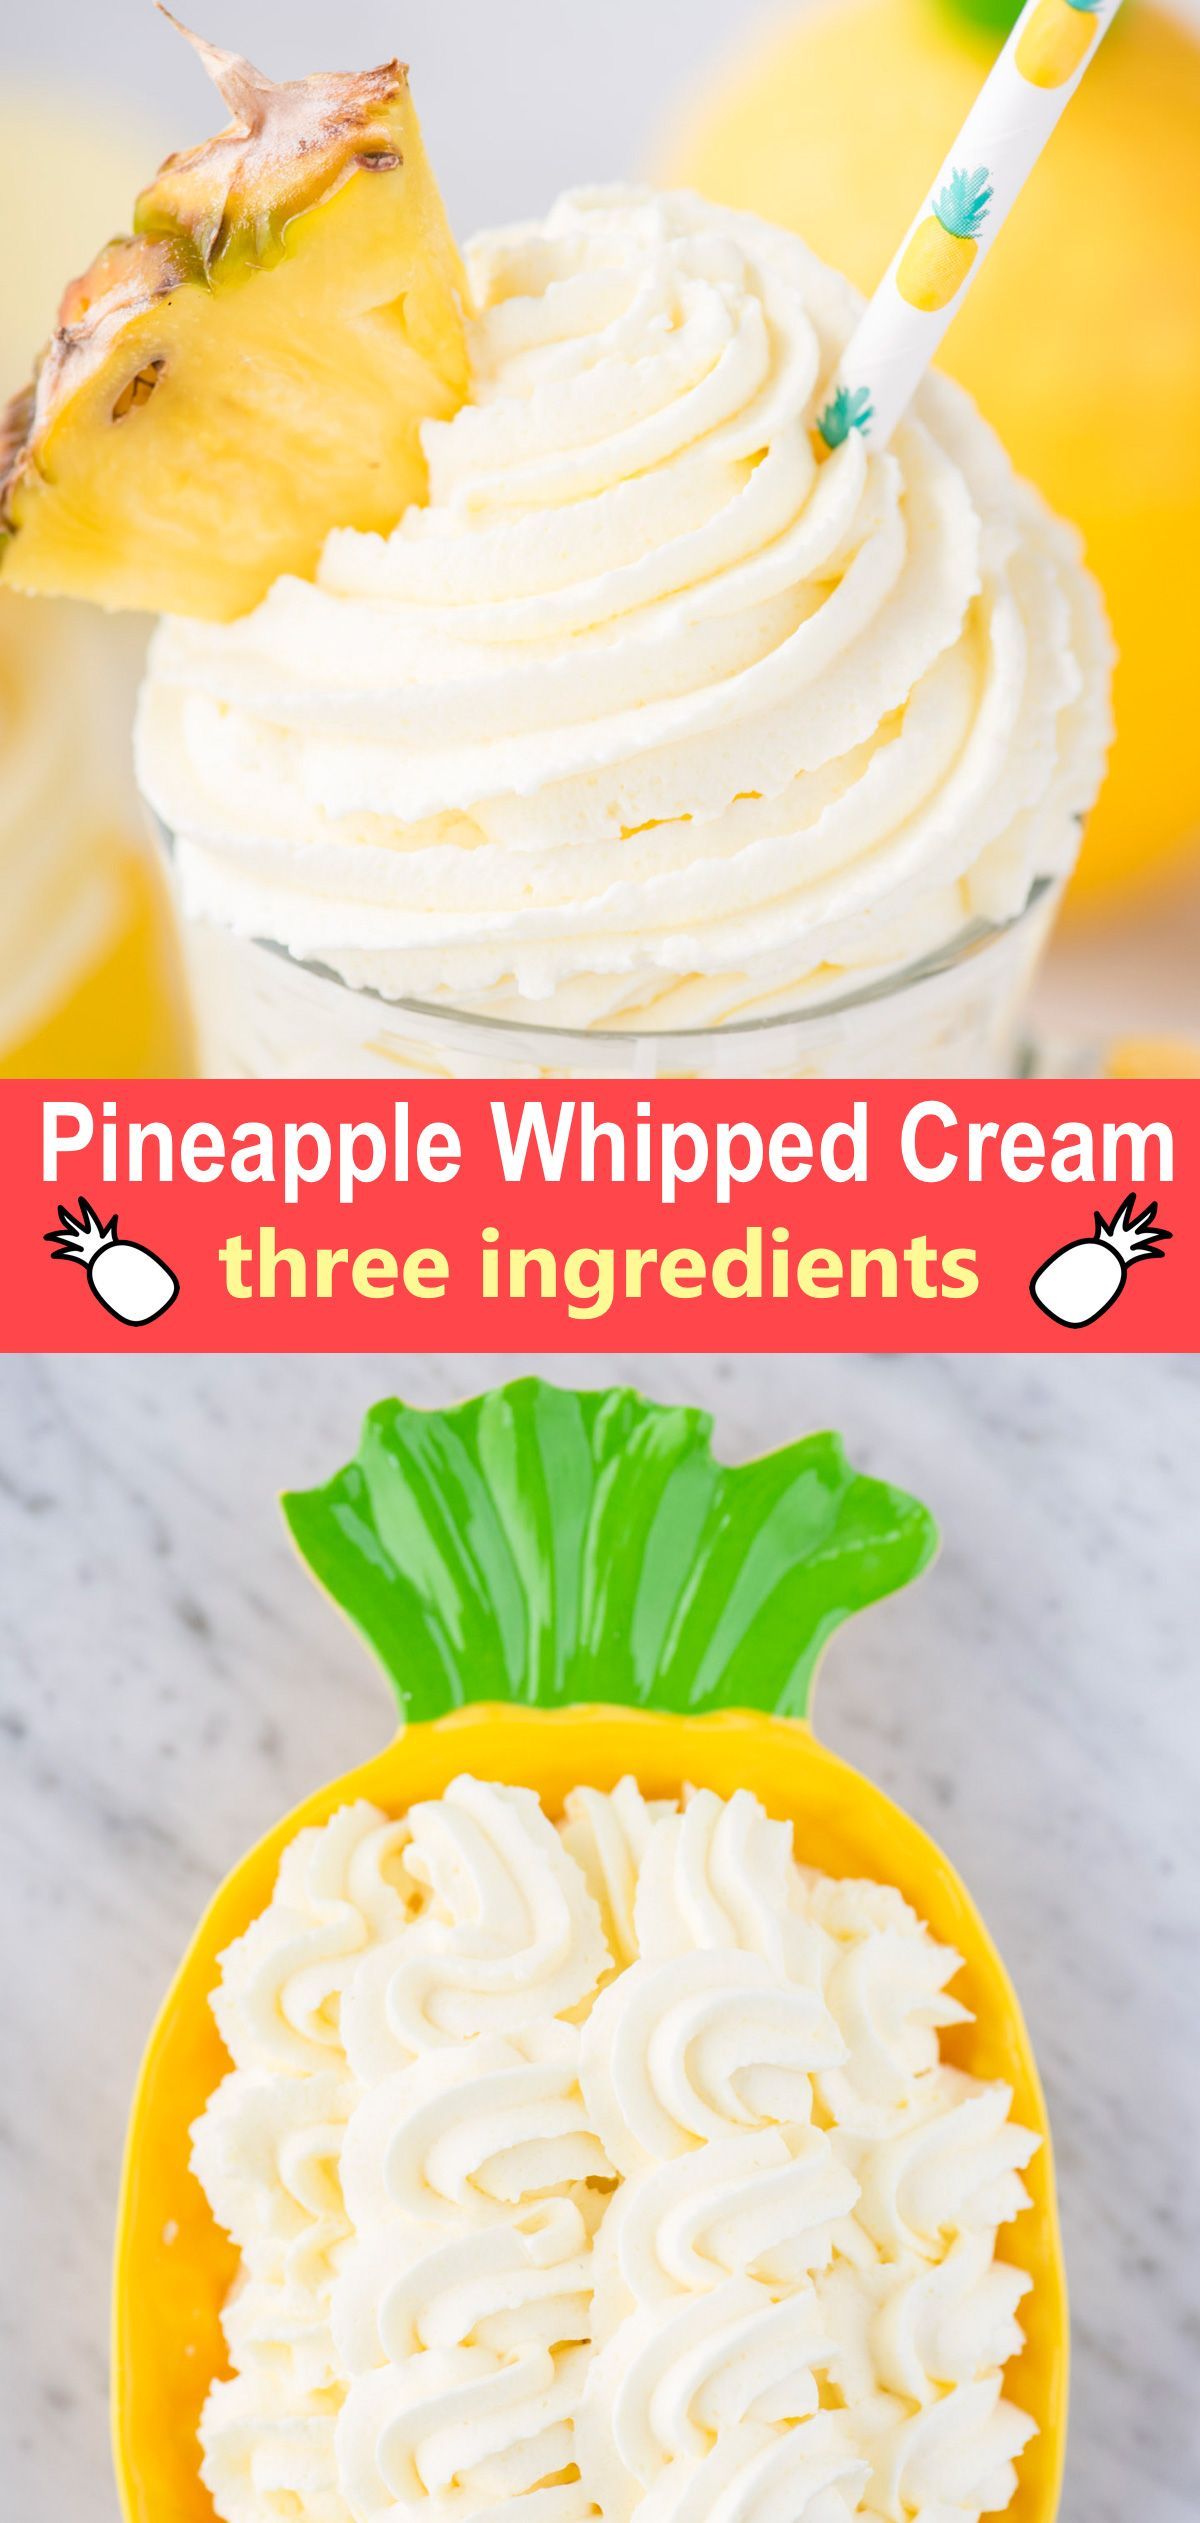 Pineapple Whipped Cream -   15 cake Pineapple frostings ideas